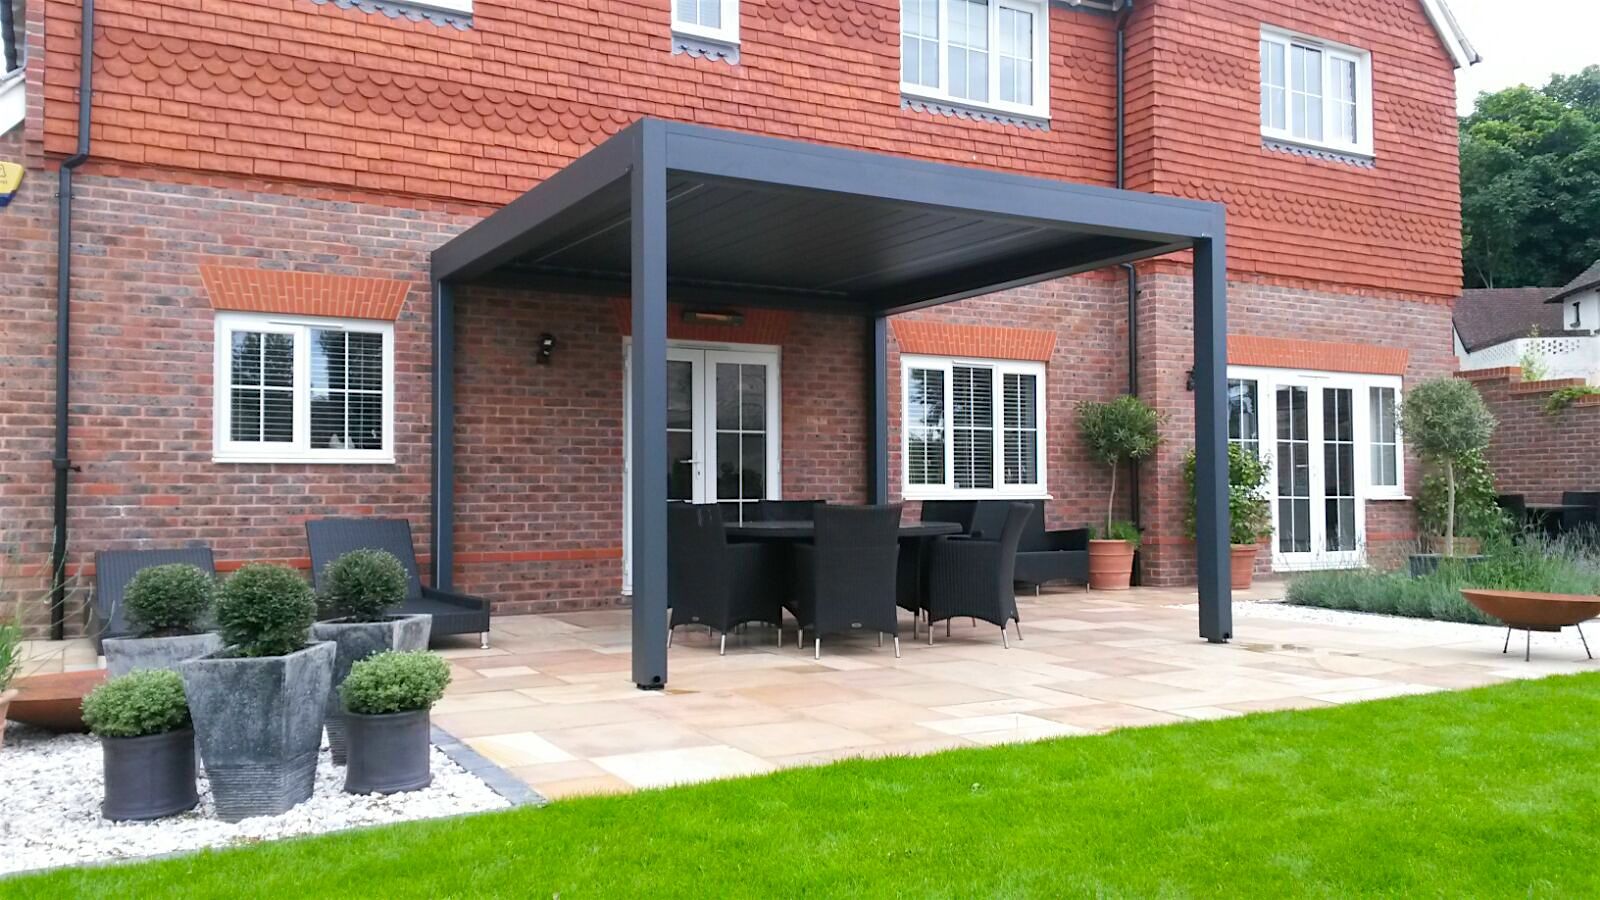 Outdoor Living Pod, Louvered Roof Patio Canopy Installation in Findon, West Sussex. homify Jardines de estilo moderno outdoor living pod,louvered,roof,patio,terrace,canopy,garden,room